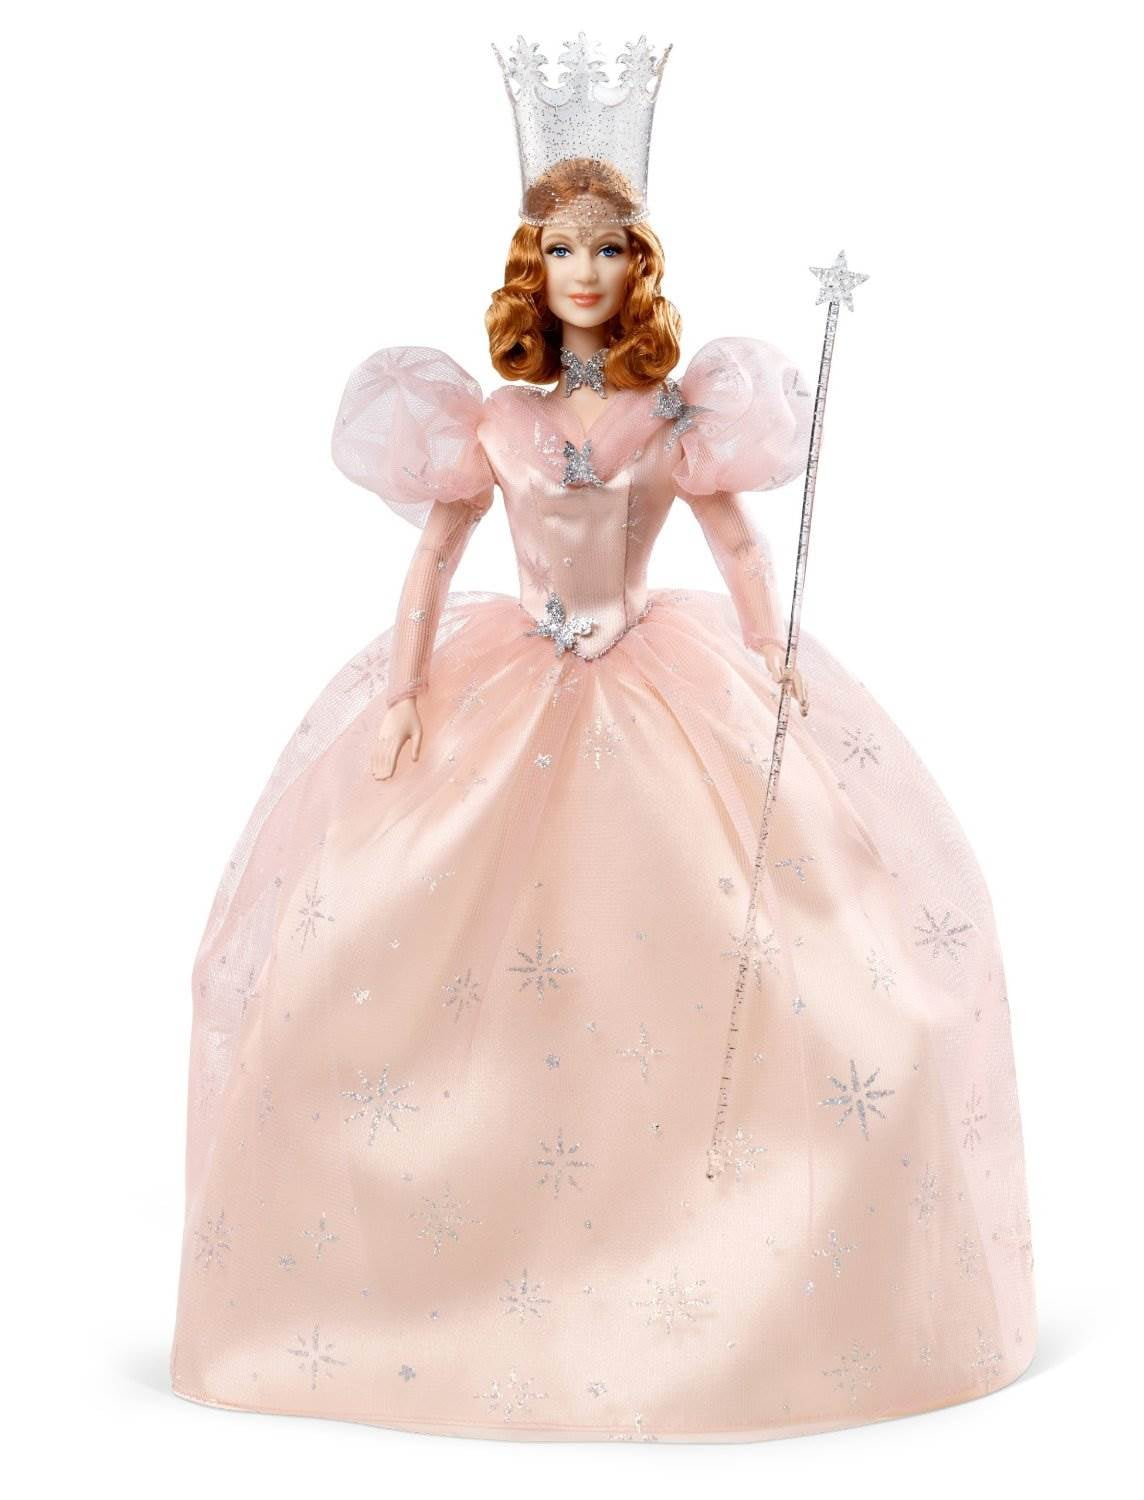 Mattel The Wizard of Oz Glinda the Good Witch of the North Barbie Doll